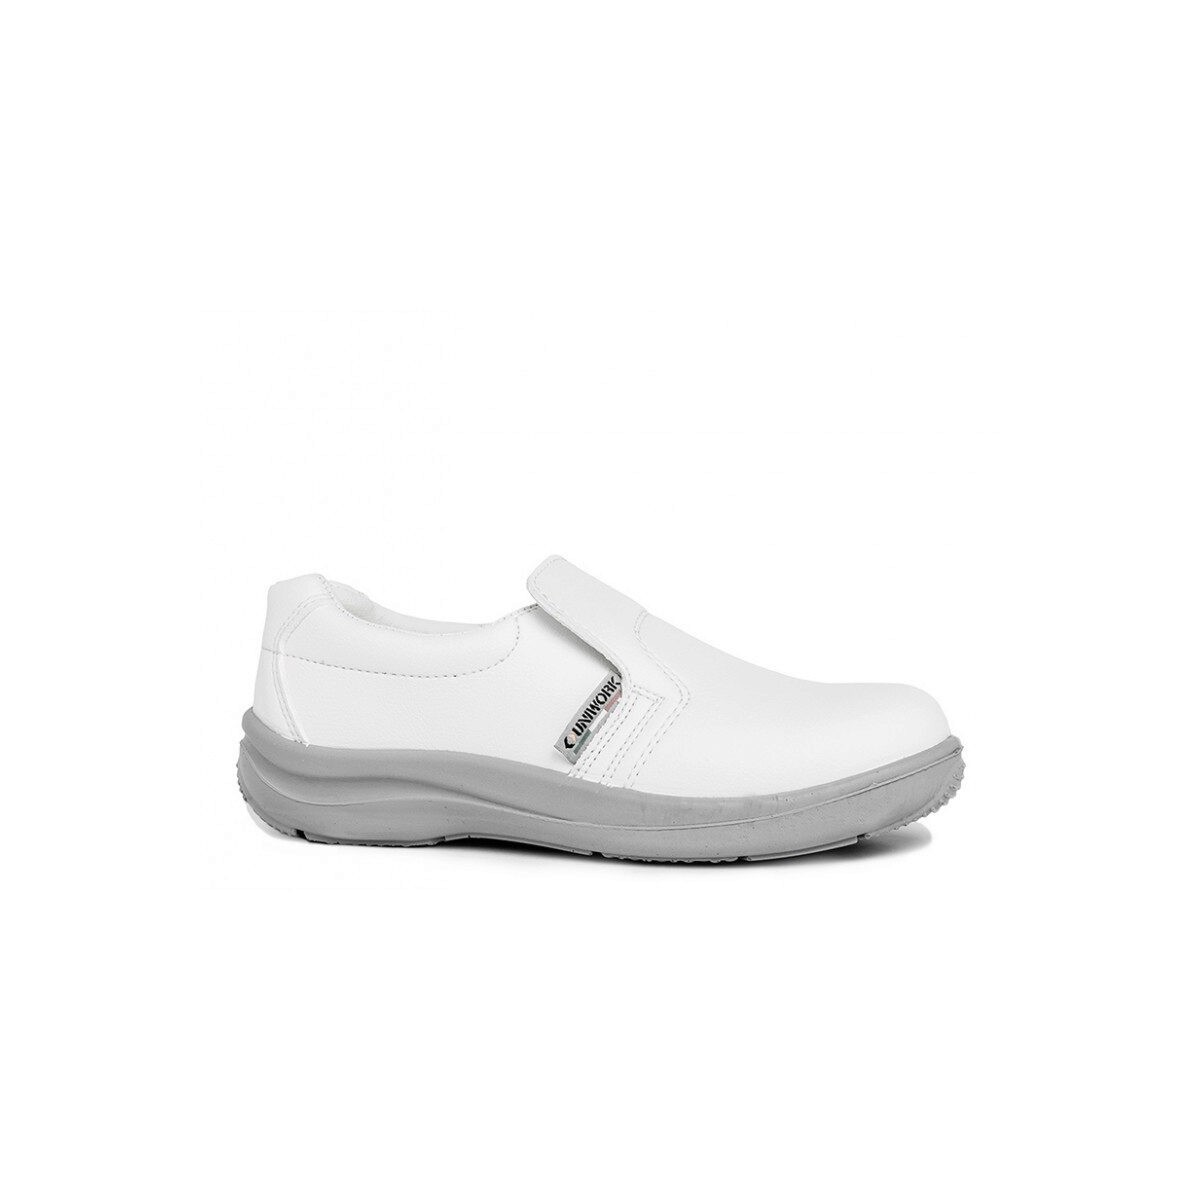 CHAUSSURE SECURIT  MIXTE BLANC TAILLE 47